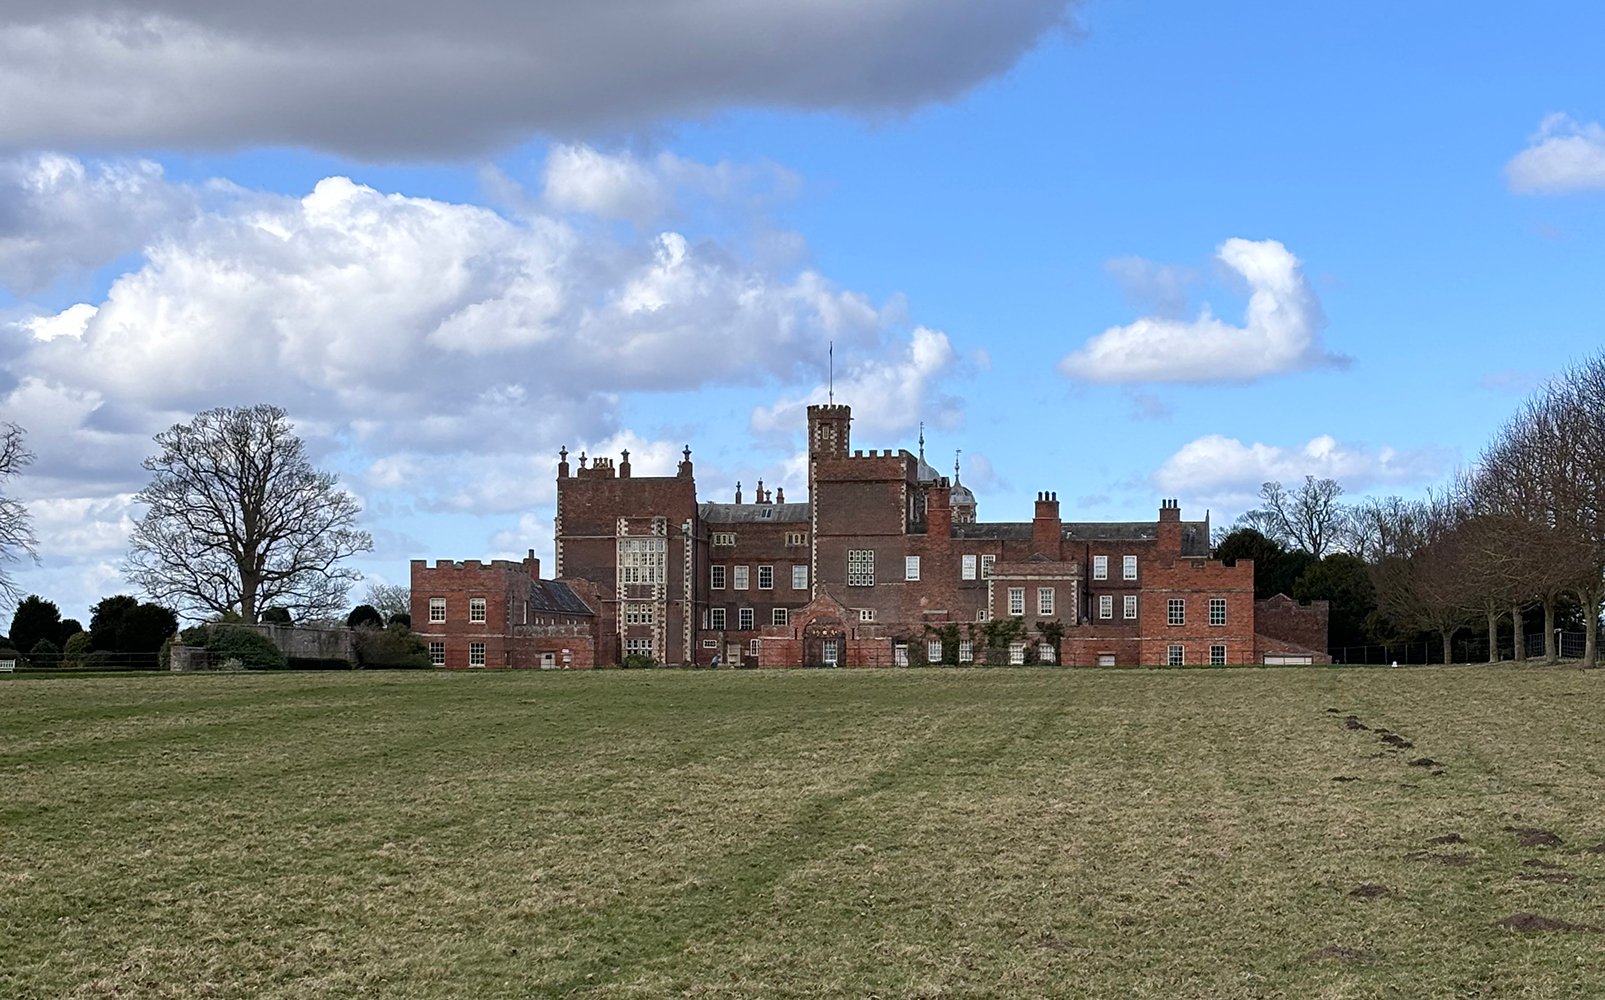 Image name burton constable hall red bricks blue sky and clouds east yorkshire the 17 image from the post A look at the history of Burton Constable Hall, with Dr Emma Wells in Yorkshire.com.